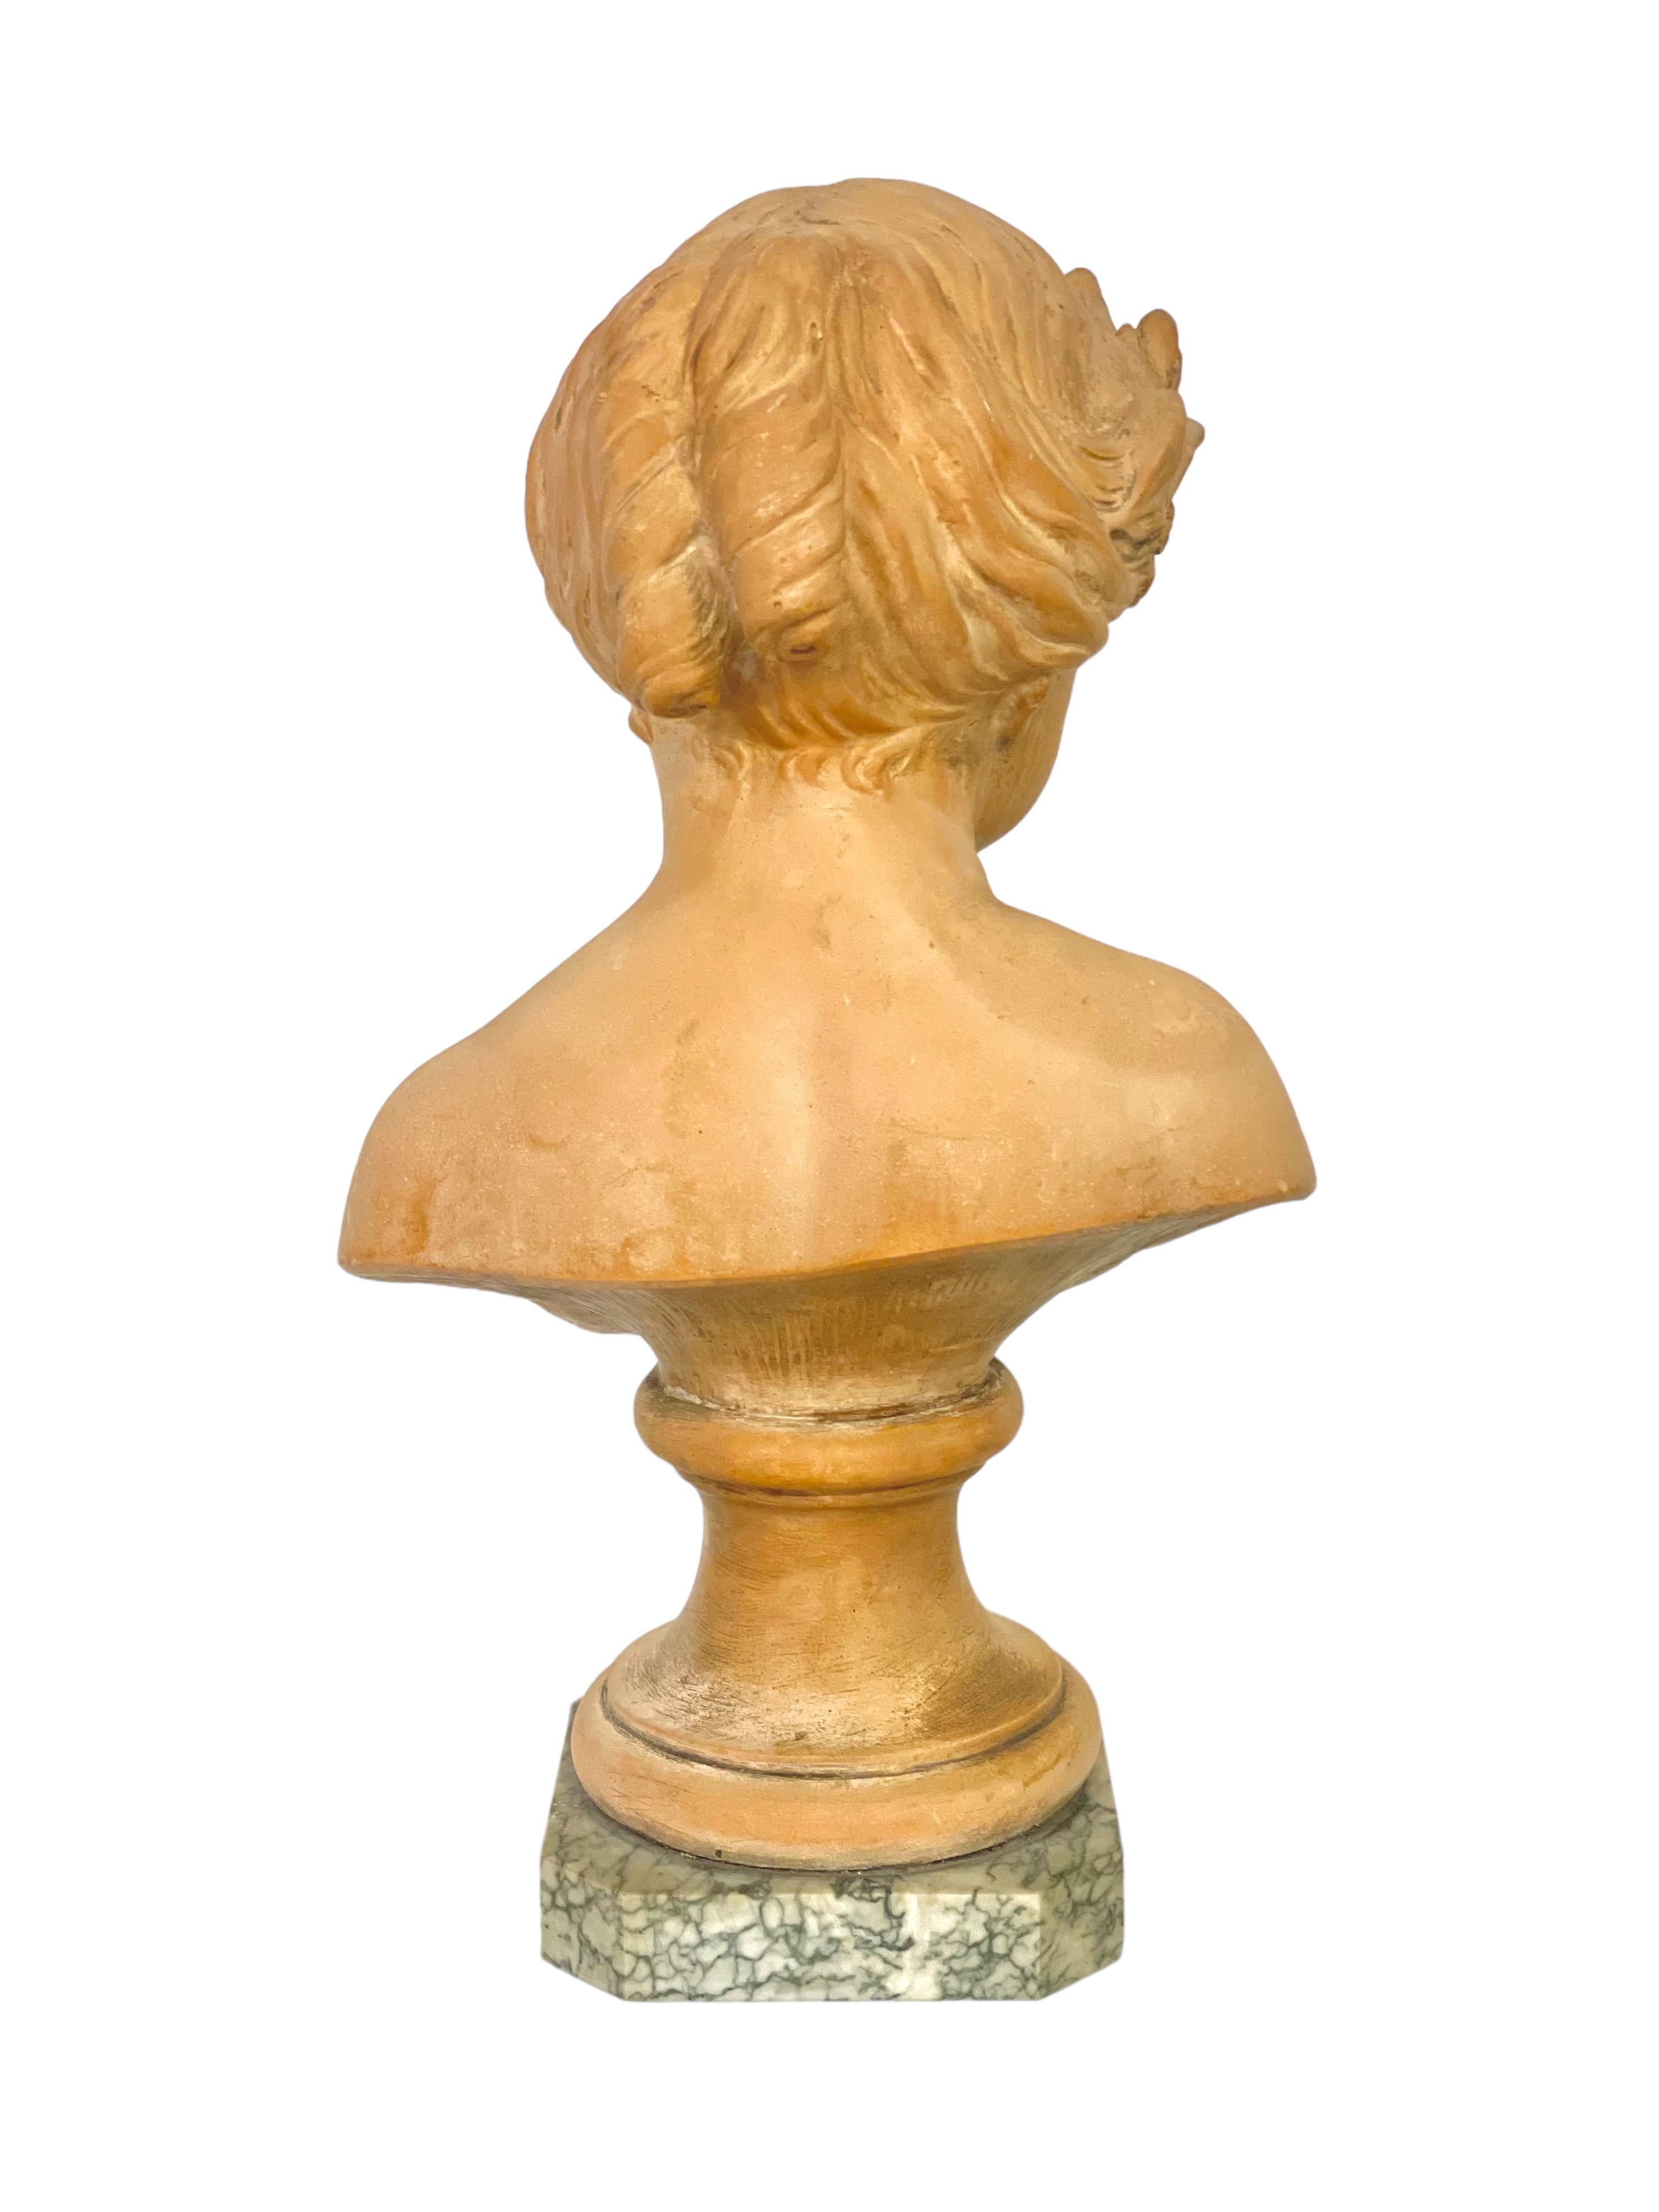 19th Century Terracotta Bust of Young Maiden in a Romantic Style For Sale 2